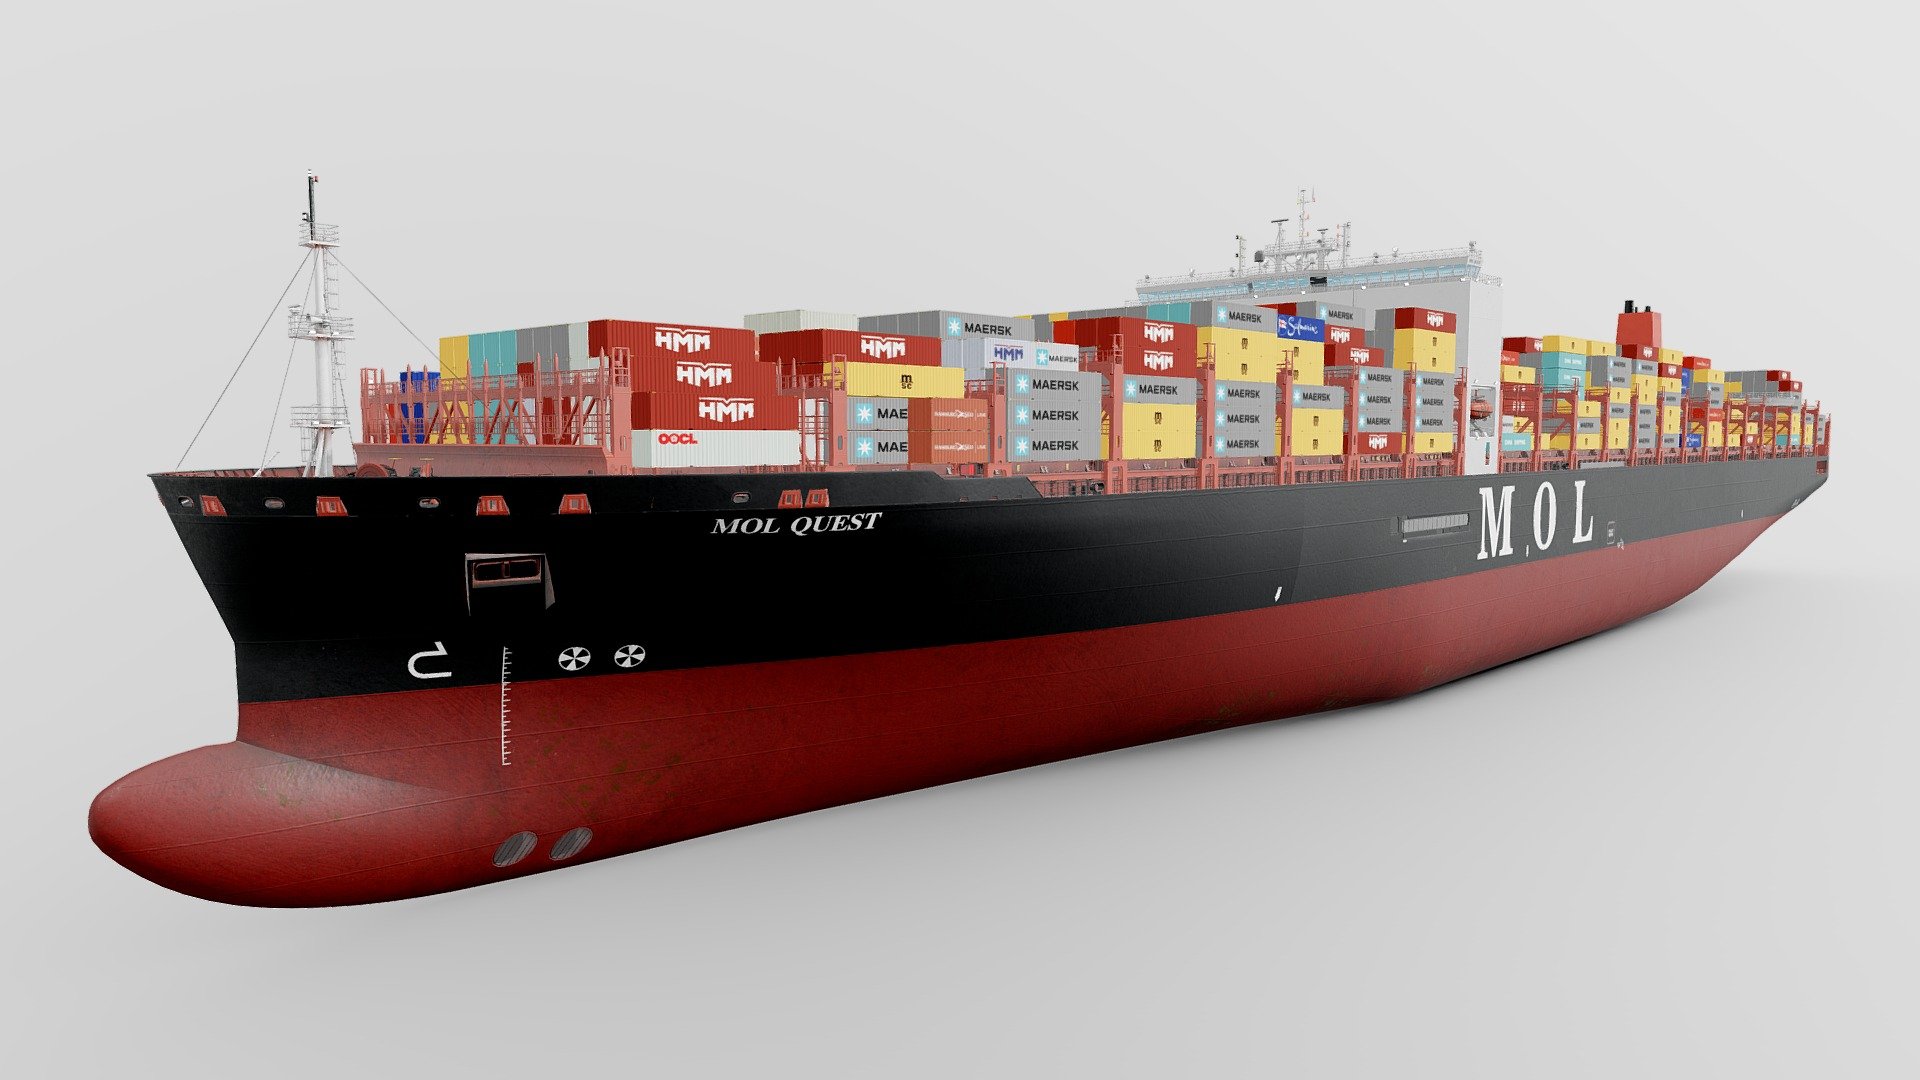 Highly detailed container ship model.
For distant and close angles.
For visualization of animations and games.
The Model has an original size.
Each container can be removed by creating a different ship loading.
Model formats: .max (3ds Max 2016 VRay)
.fbx (Multi Format)
*.ma (Maya 2018)
Made in 3ds Max 2016 using vray 3.20.03,
Maya (studio environment is not included in the set).
Blender 3.2.2
Type Container ship
Tonnage 169.423 GT
Length 397 m
Draft 16
DWT : 150936 - MOL Container Ship Quest - Buy Royalty Free 3D model by IgYerm (@IgorYerm) 3d model